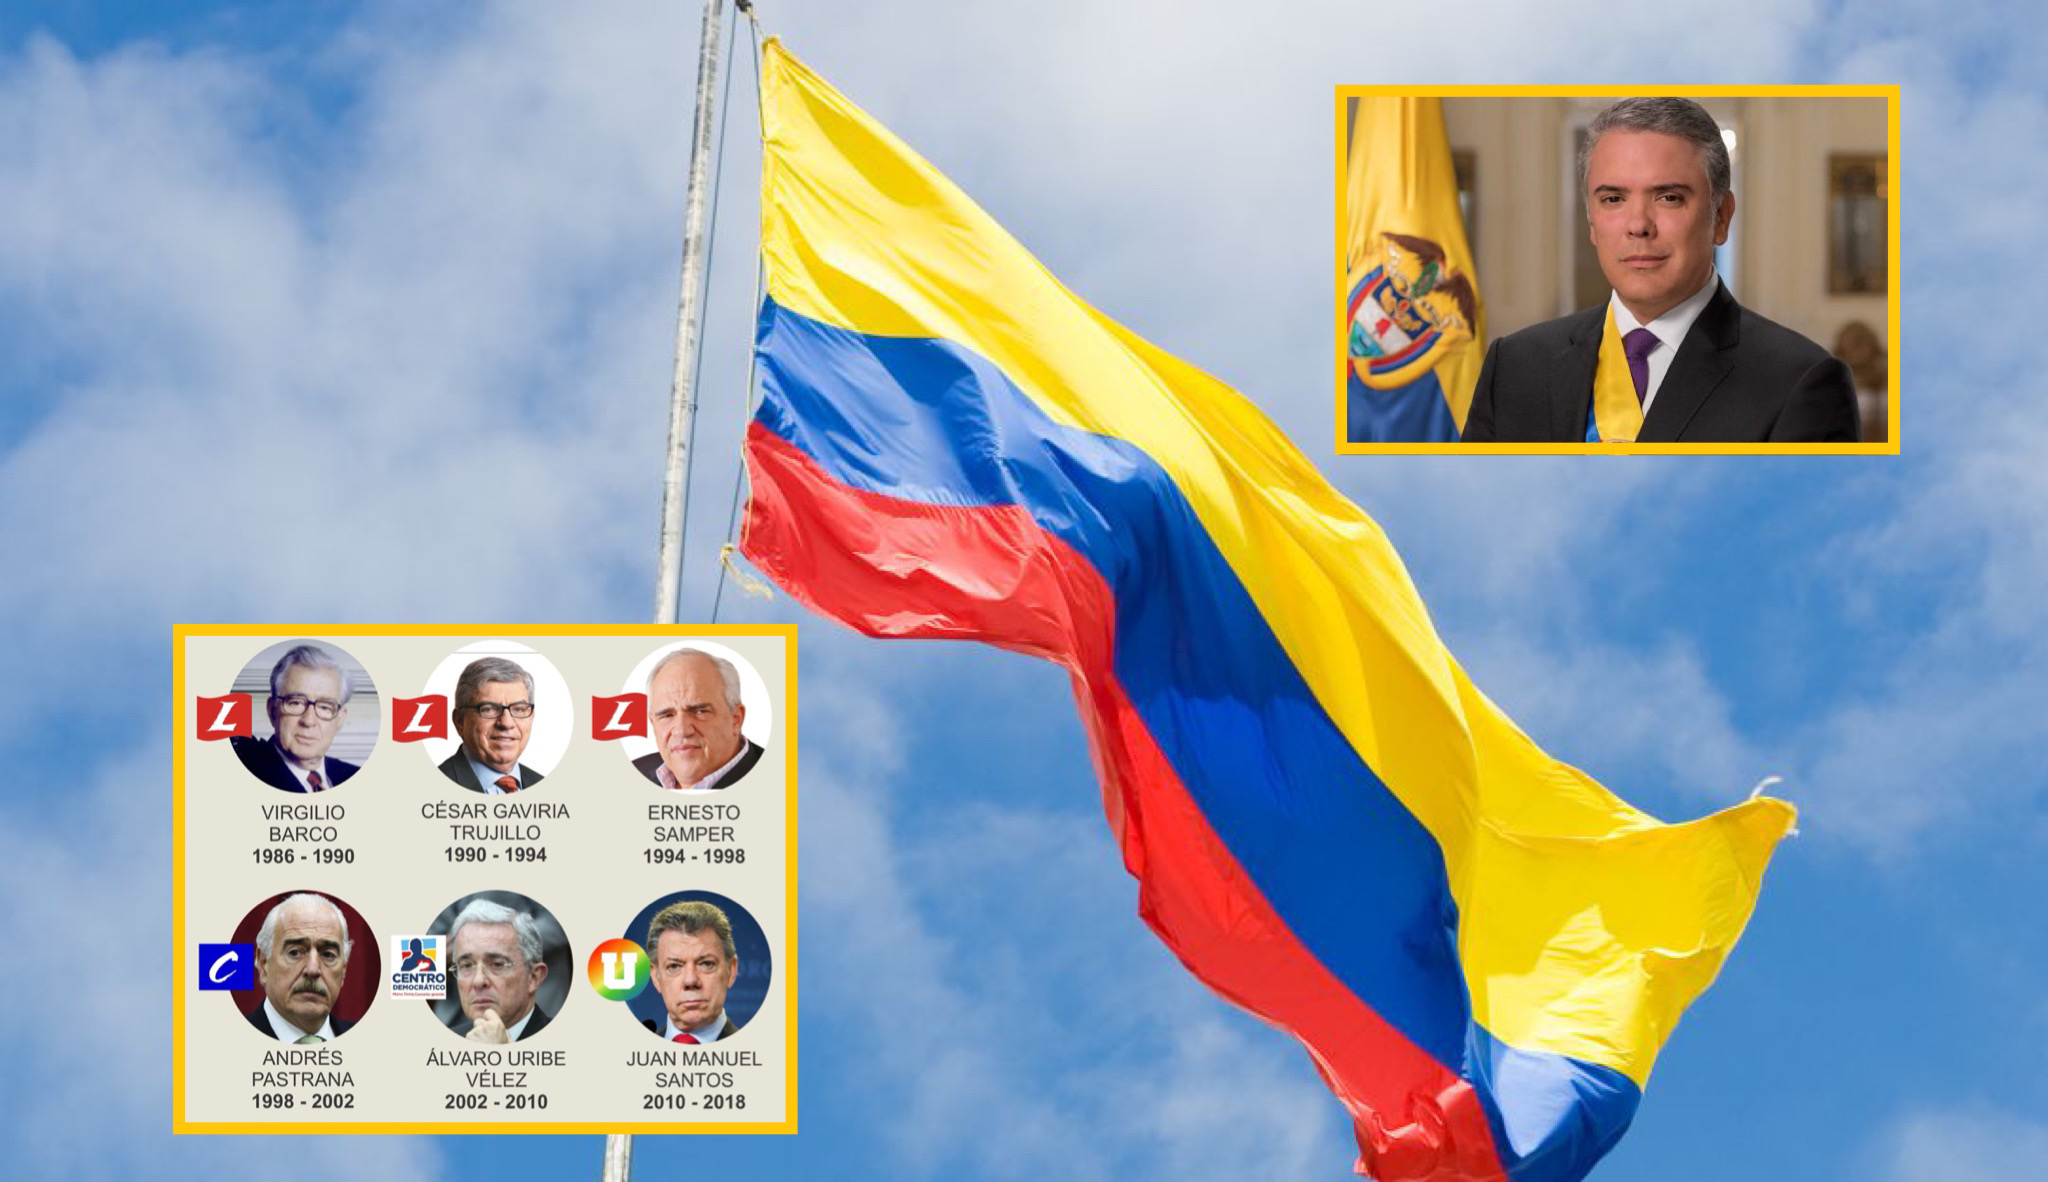 The presidencies of the last 30 years in Colombia: security reforms, theft of public resources, disappearances and even peace agreements